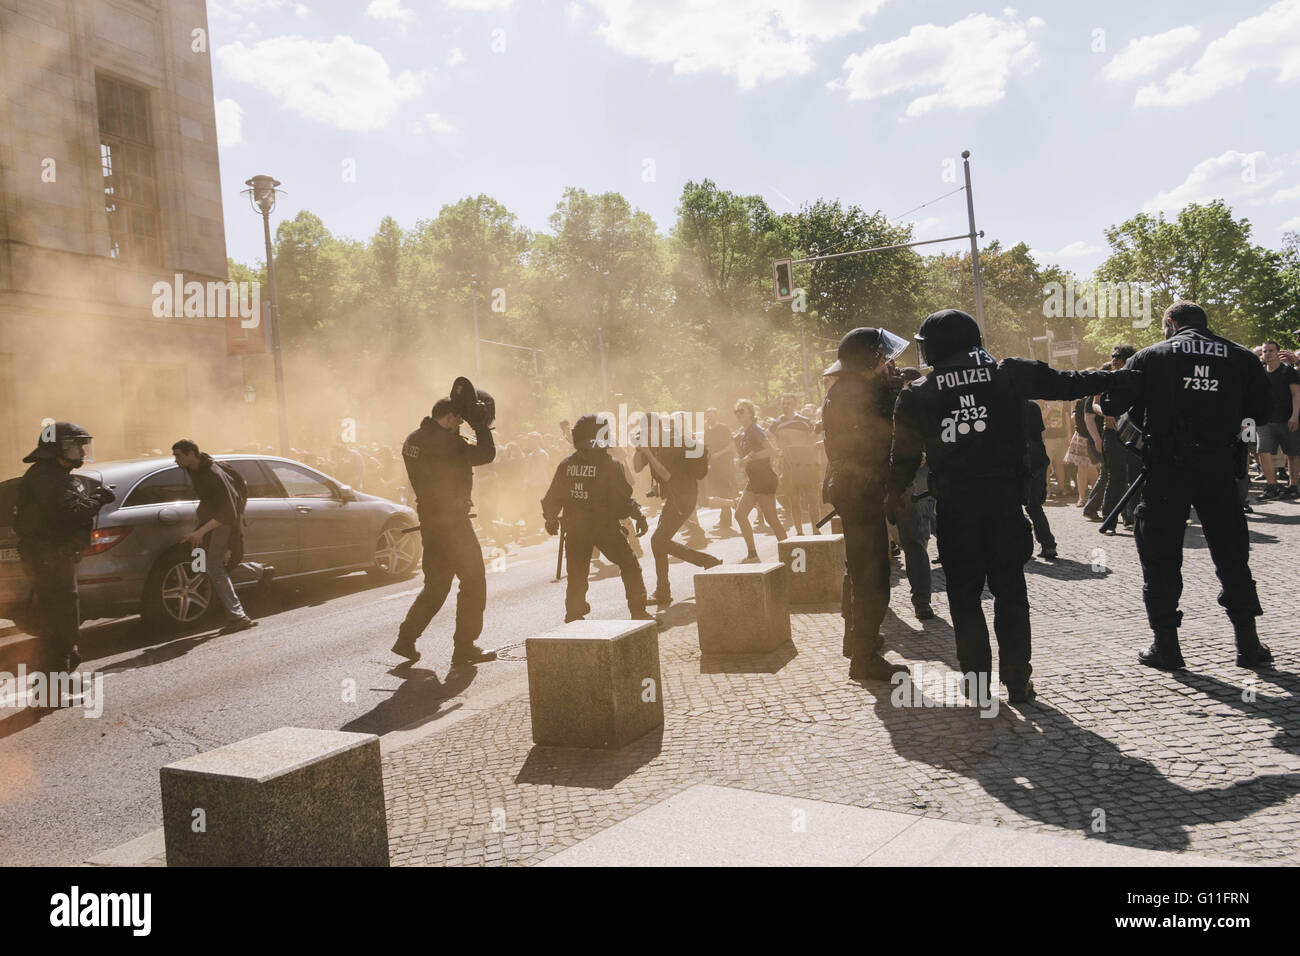 Berlin, Berlin, Germany. 7th May, 2016. Police secures a road after protesters break through a police barrier during the counter protests against the rally held under the motto 'Merkel muss weg![Merkel must go]' organised by far-right group 'We for Berlin & We for Germany' Credit:  Jan Scheunert/ZUMA Wire/Alamy Live News Stock Photo